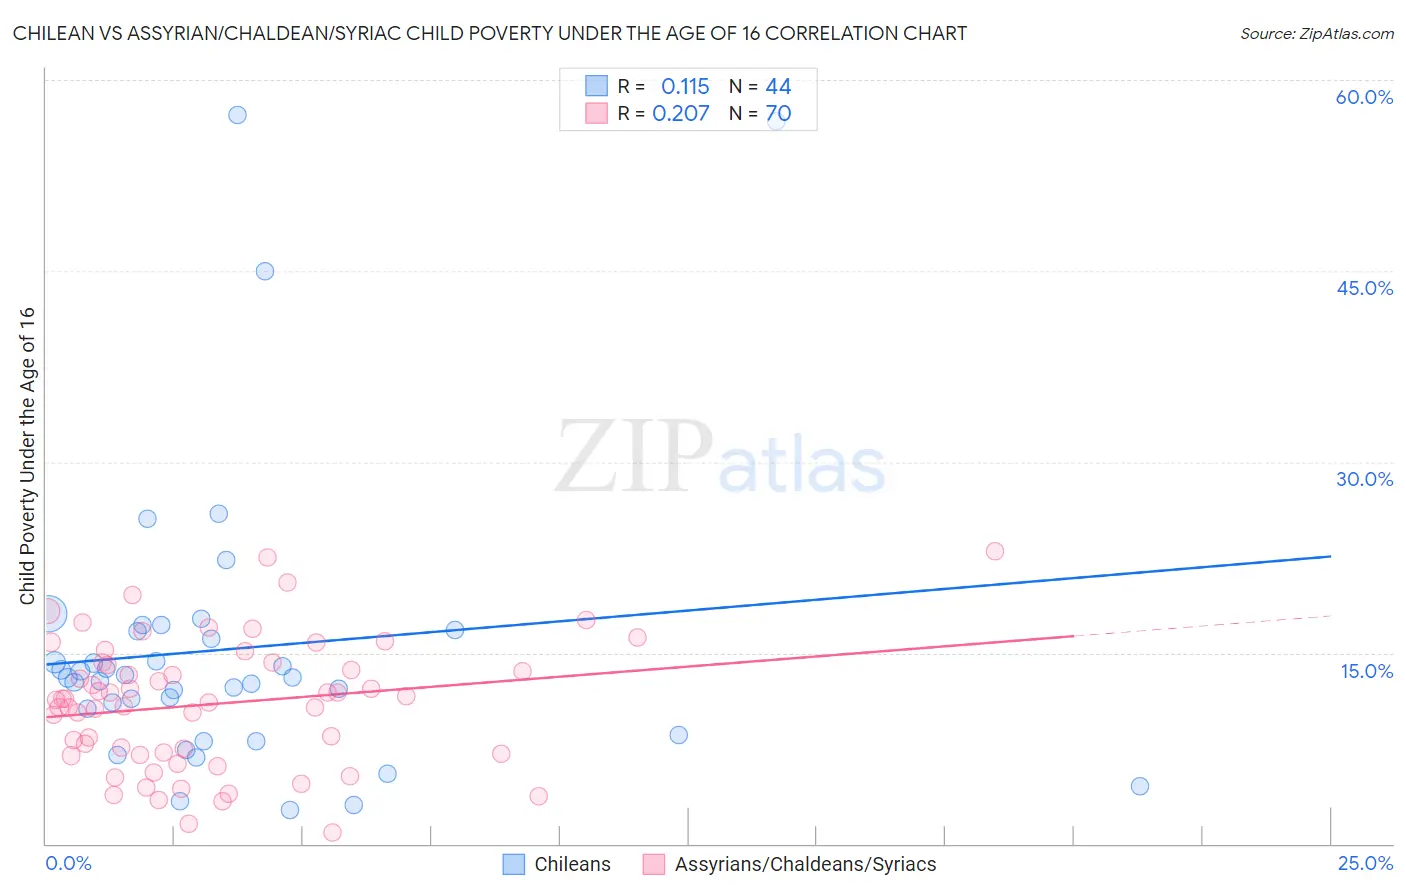 Chilean vs Assyrian/Chaldean/Syriac Child Poverty Under the Age of 16